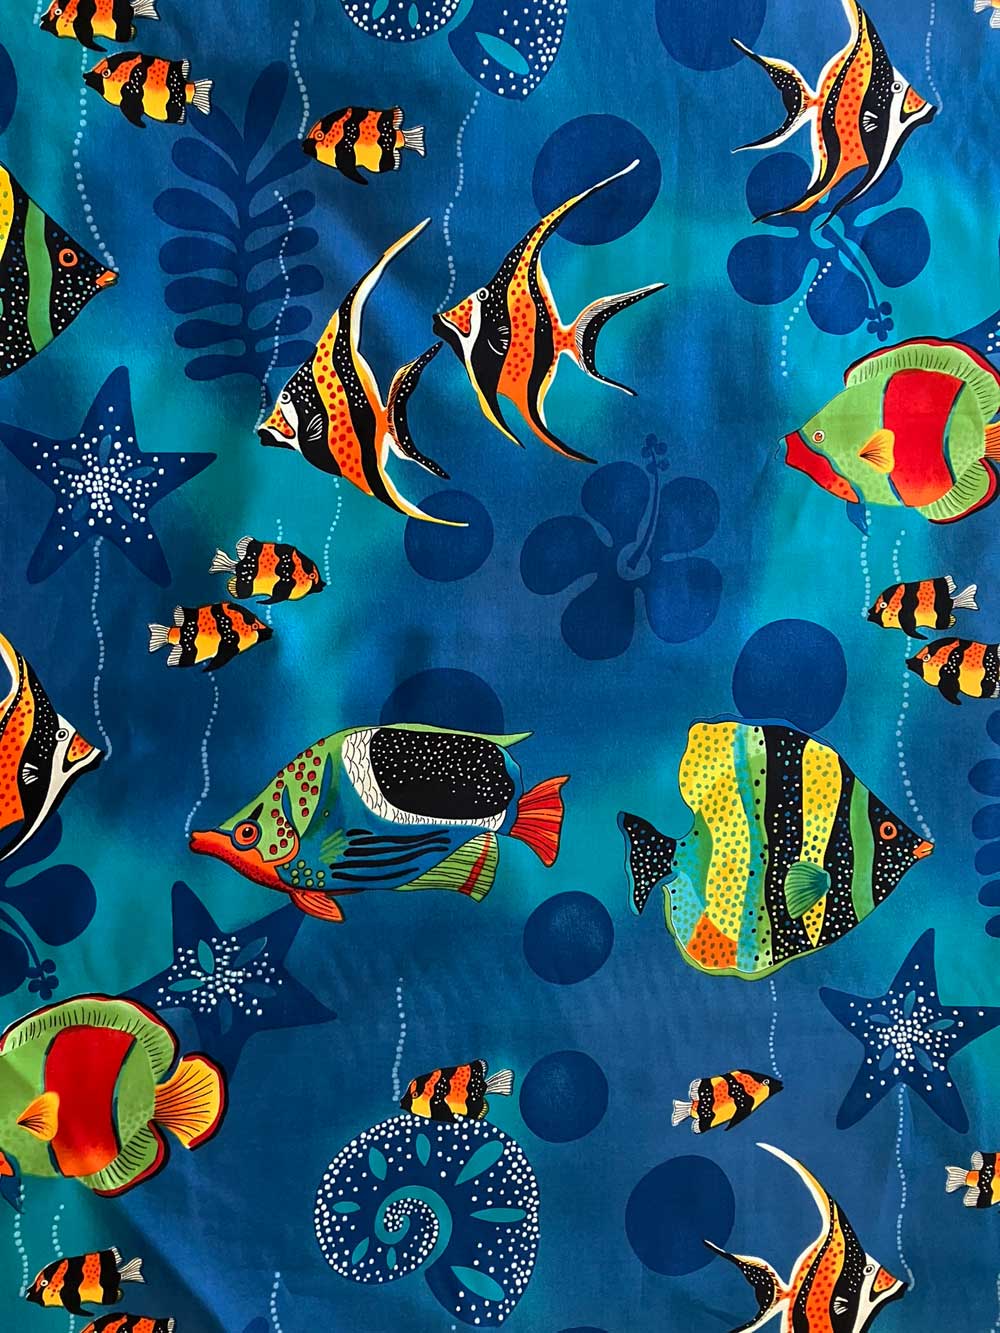 SALE Tropical Cotton Print Fabric 5262 Fish Multi, by the yard